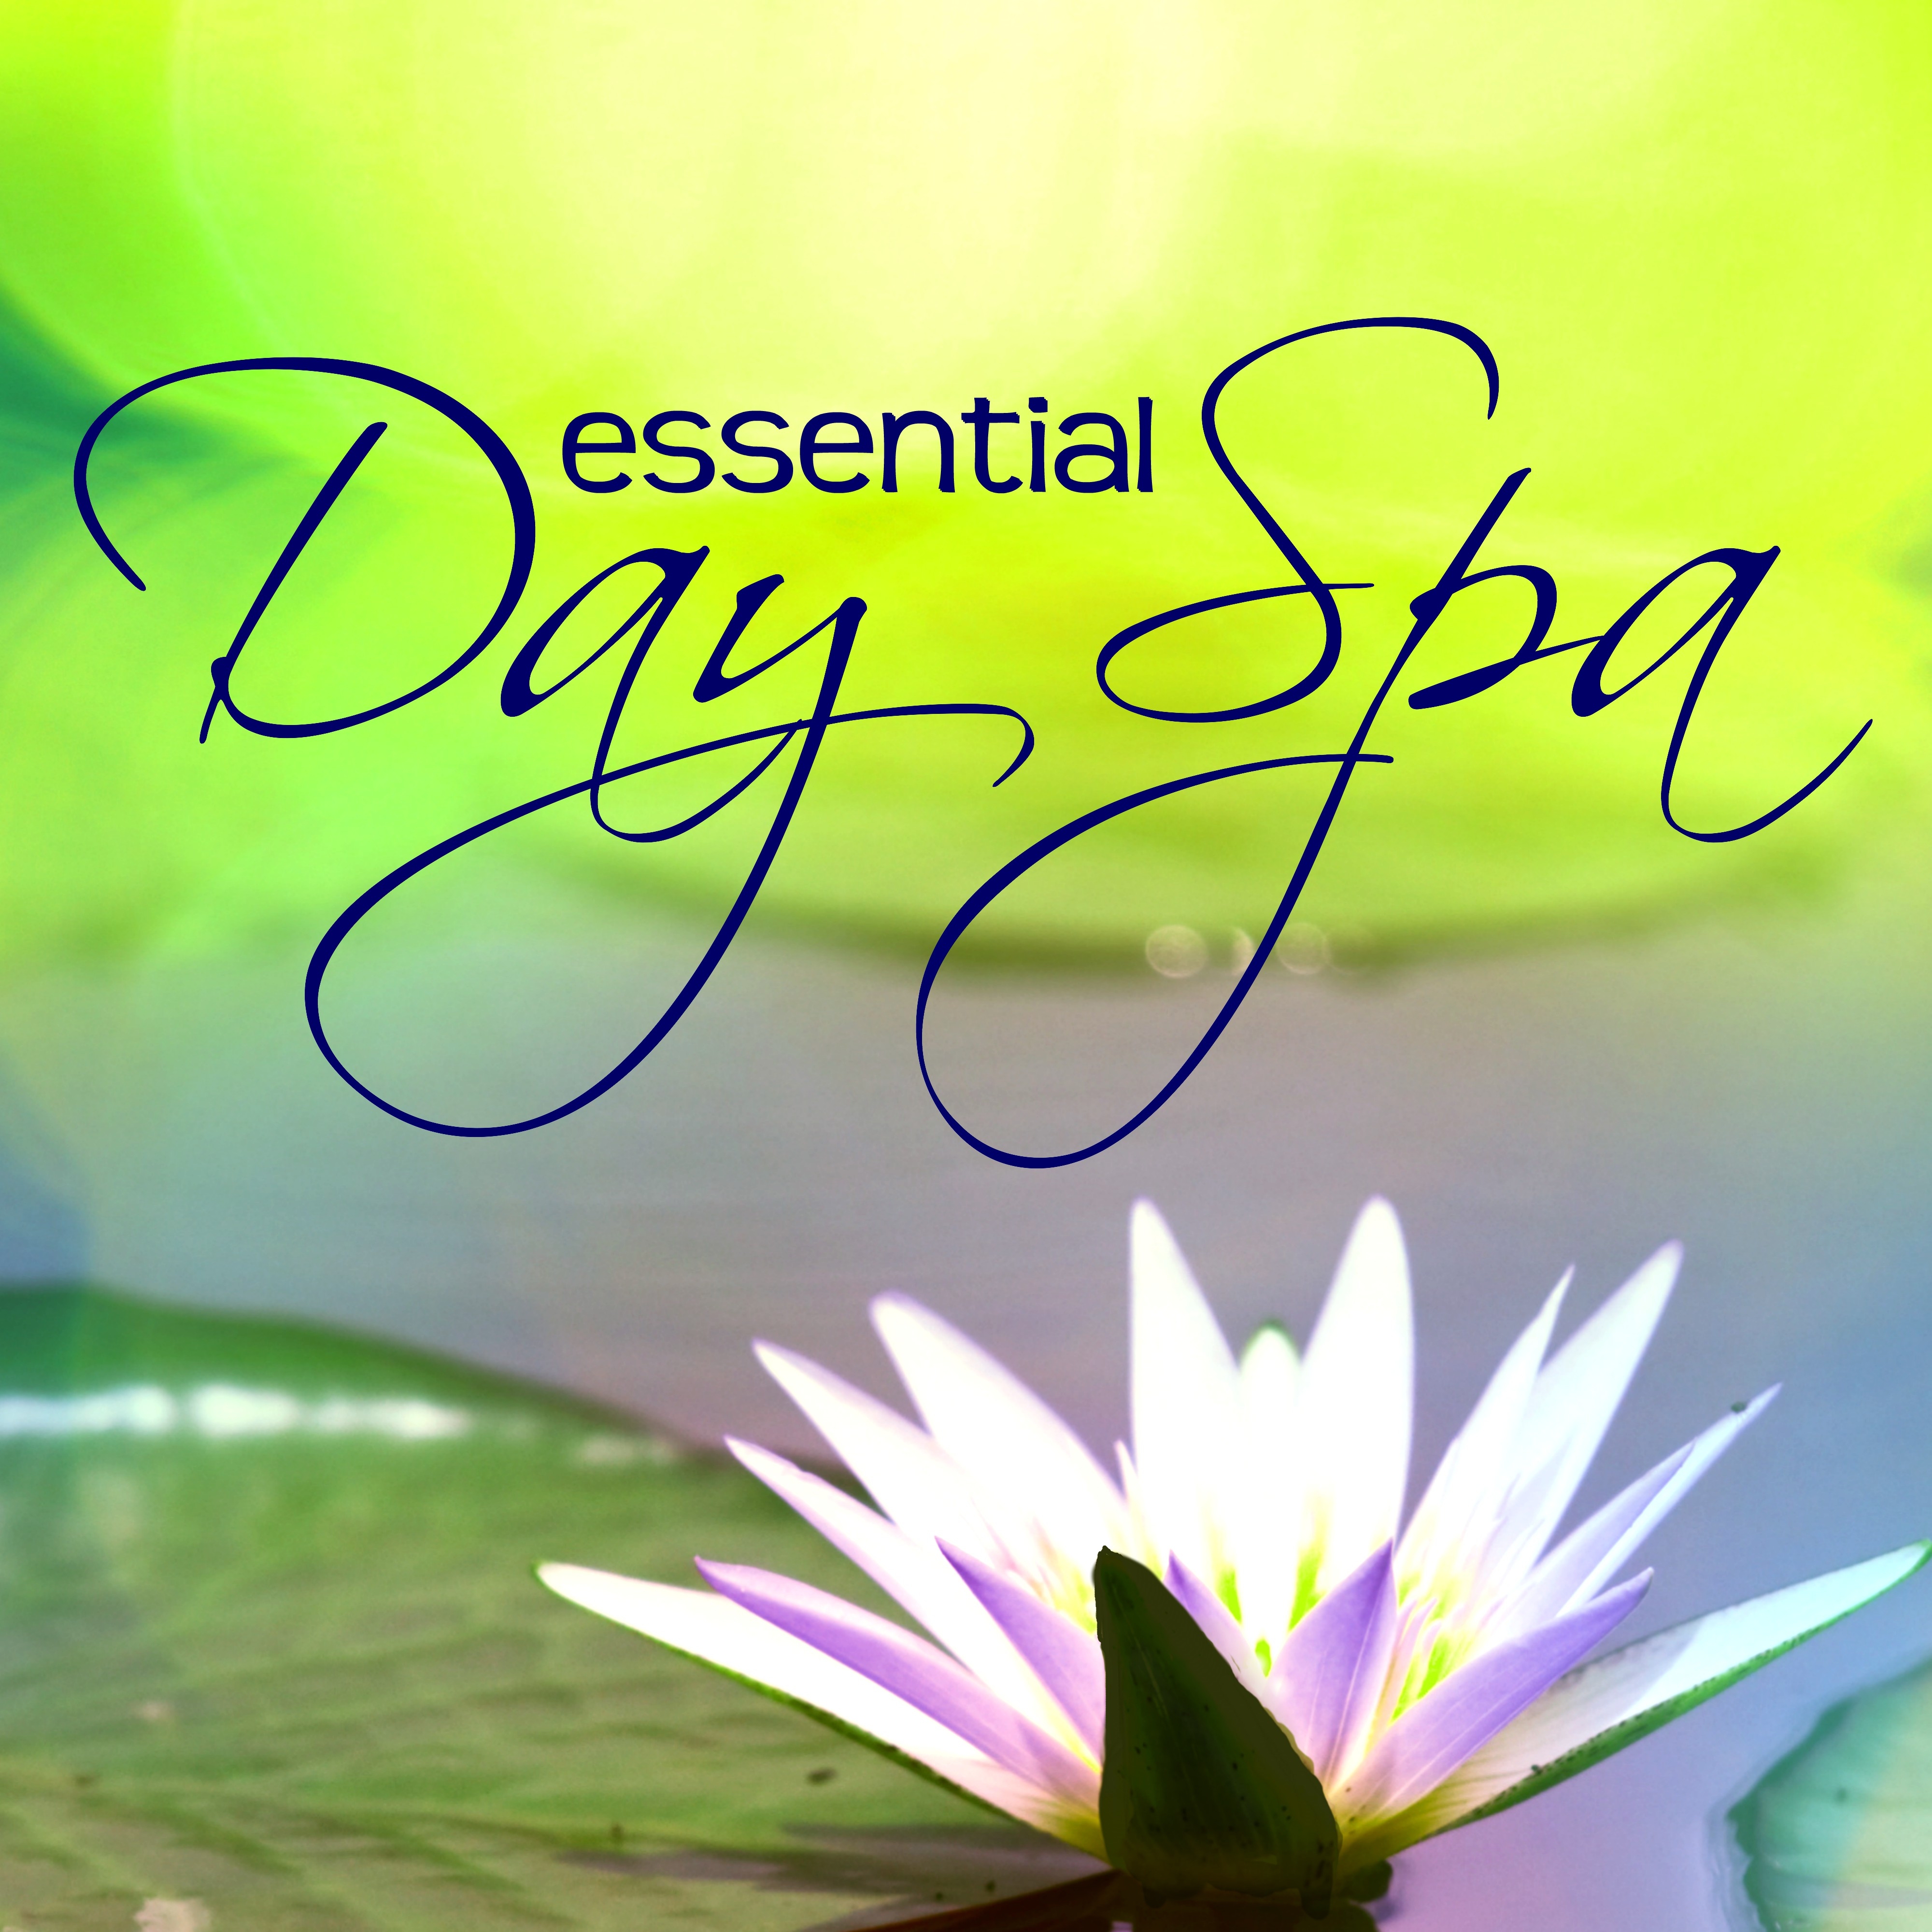 Essential Day Spa - Relaxing Soothing Sounds for Relaxation, Spa Massage and Beauty Treatments, Best Spa Music Collection